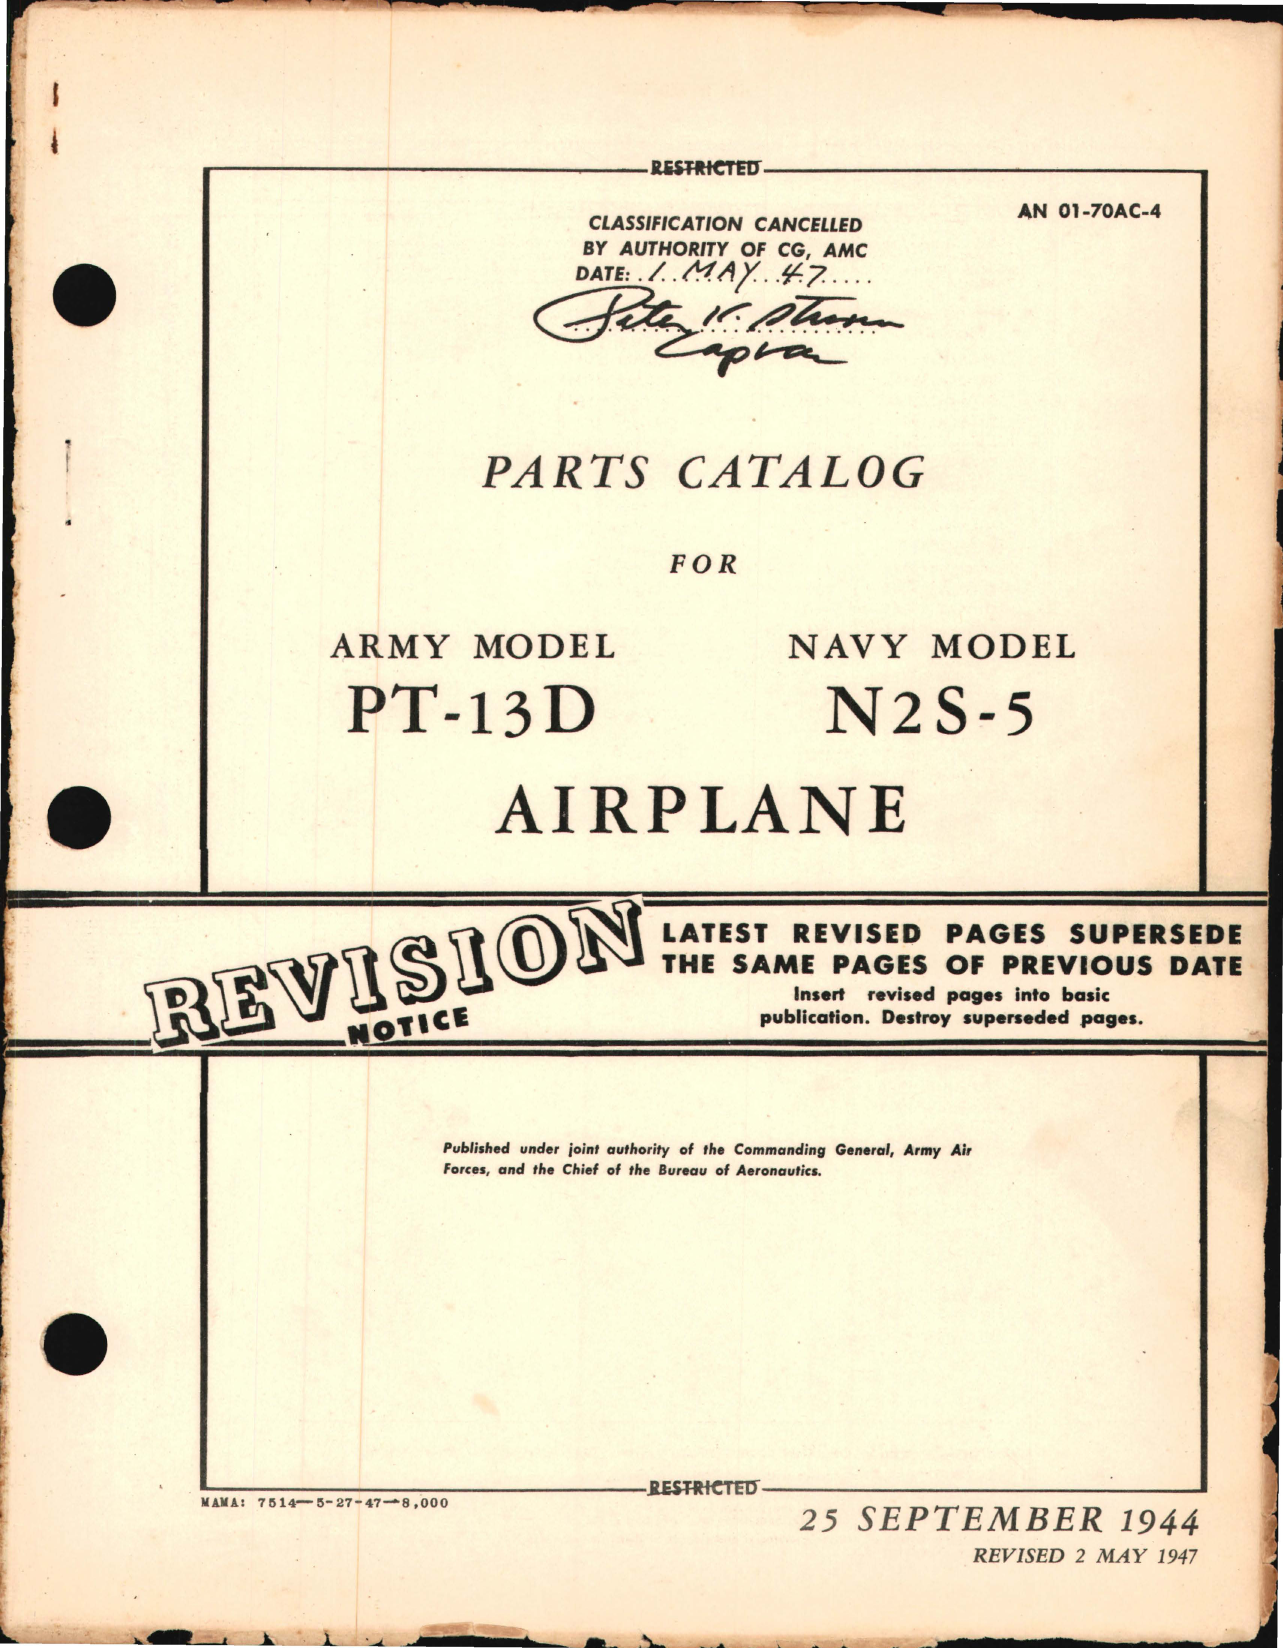 Sample page 1 from AirCorps Library document: Parts Catalog for PT-13D and N2S-5